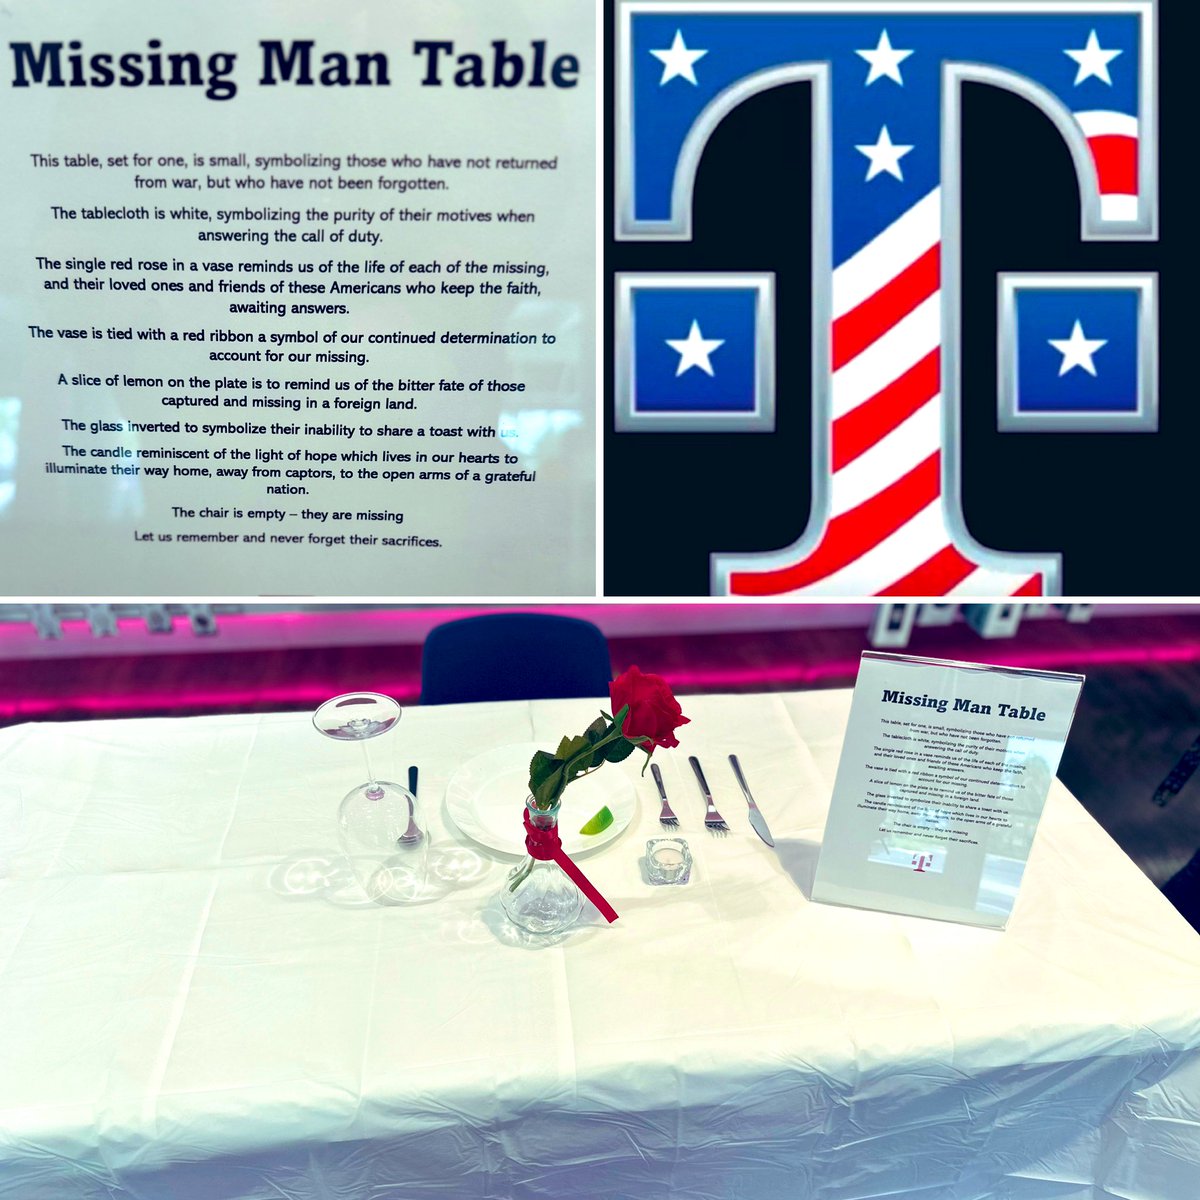 In honor of #MilitaryAppreciationMonth South Florida VAN has set up Missing Man Table displays in stores around the districts, These tables symbolize a deep and important message to those that have served. We are very proud to honor their sacrifice. 🇺🇸 #FLSouthLovesOurVeterans